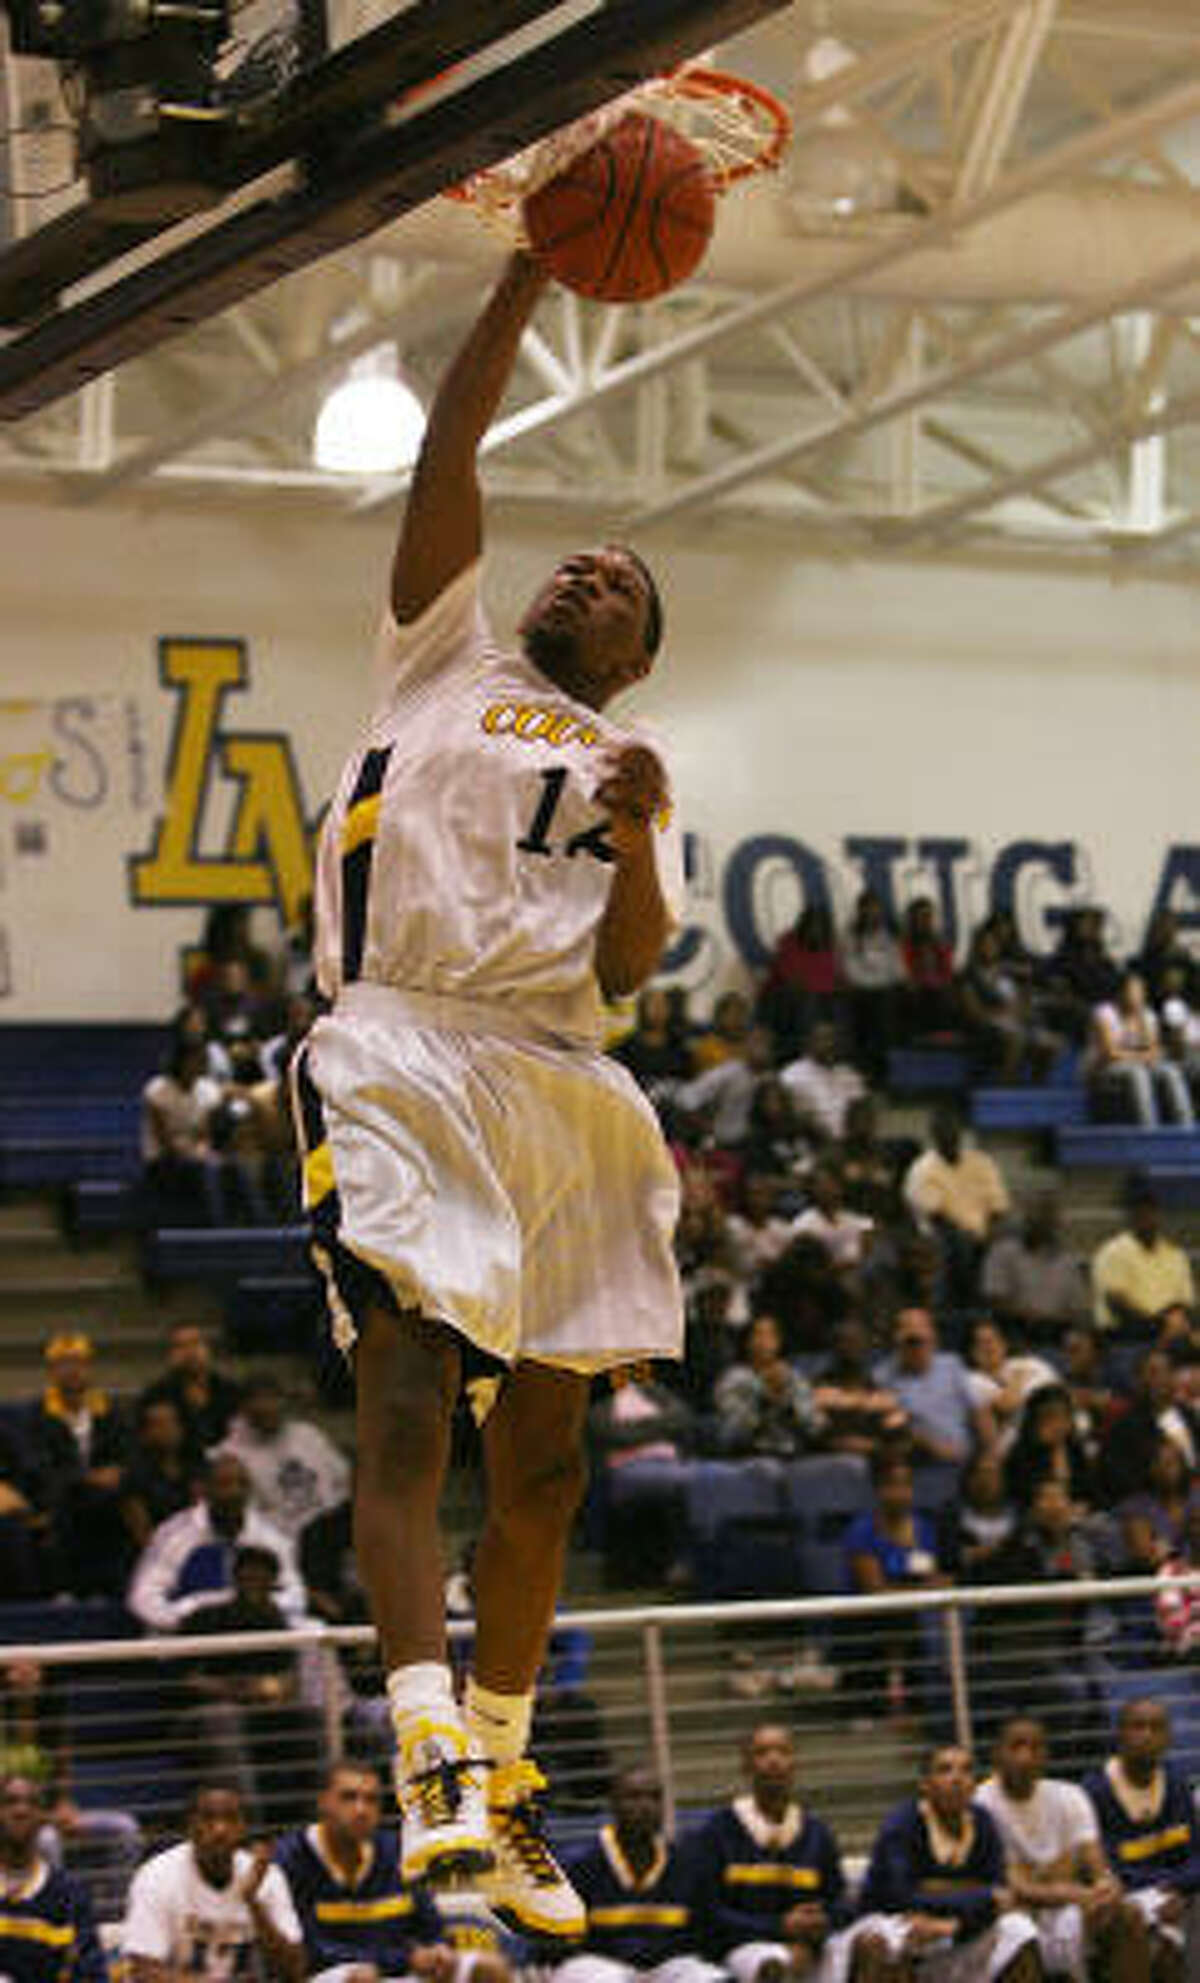 La Marque's Junen Lewis slams dunks in the 3rd Period during the basketball game at La Marque.